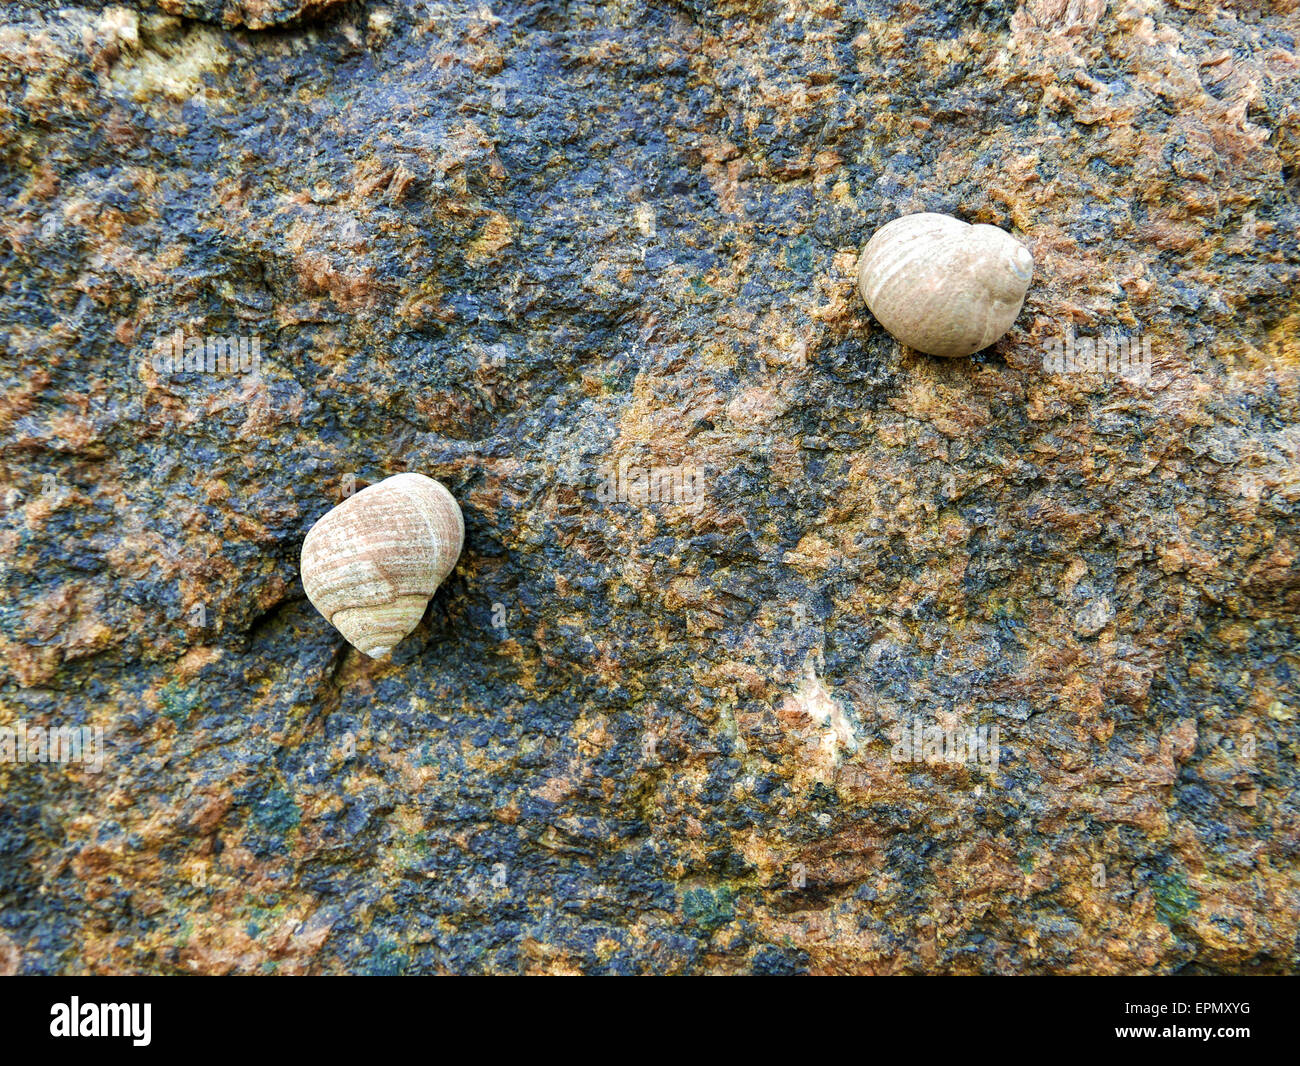 Two common periwinkle snails on a damp rock surface at low tide. Stock Photo